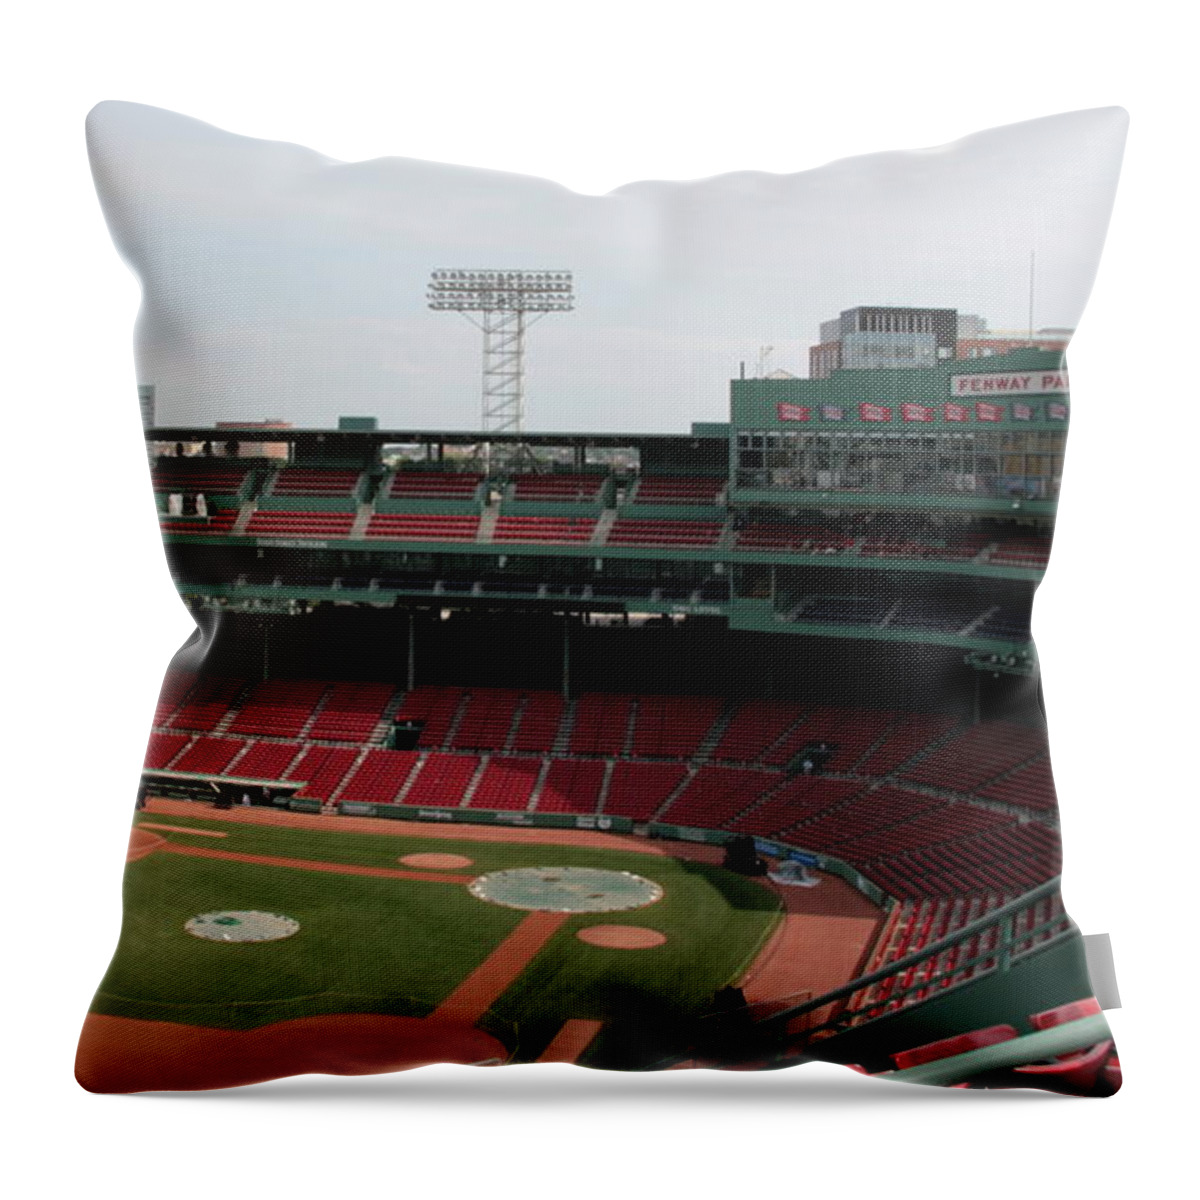 Fenway Park Throw Pillow featuring the photograph Infield by Jonathan Harper